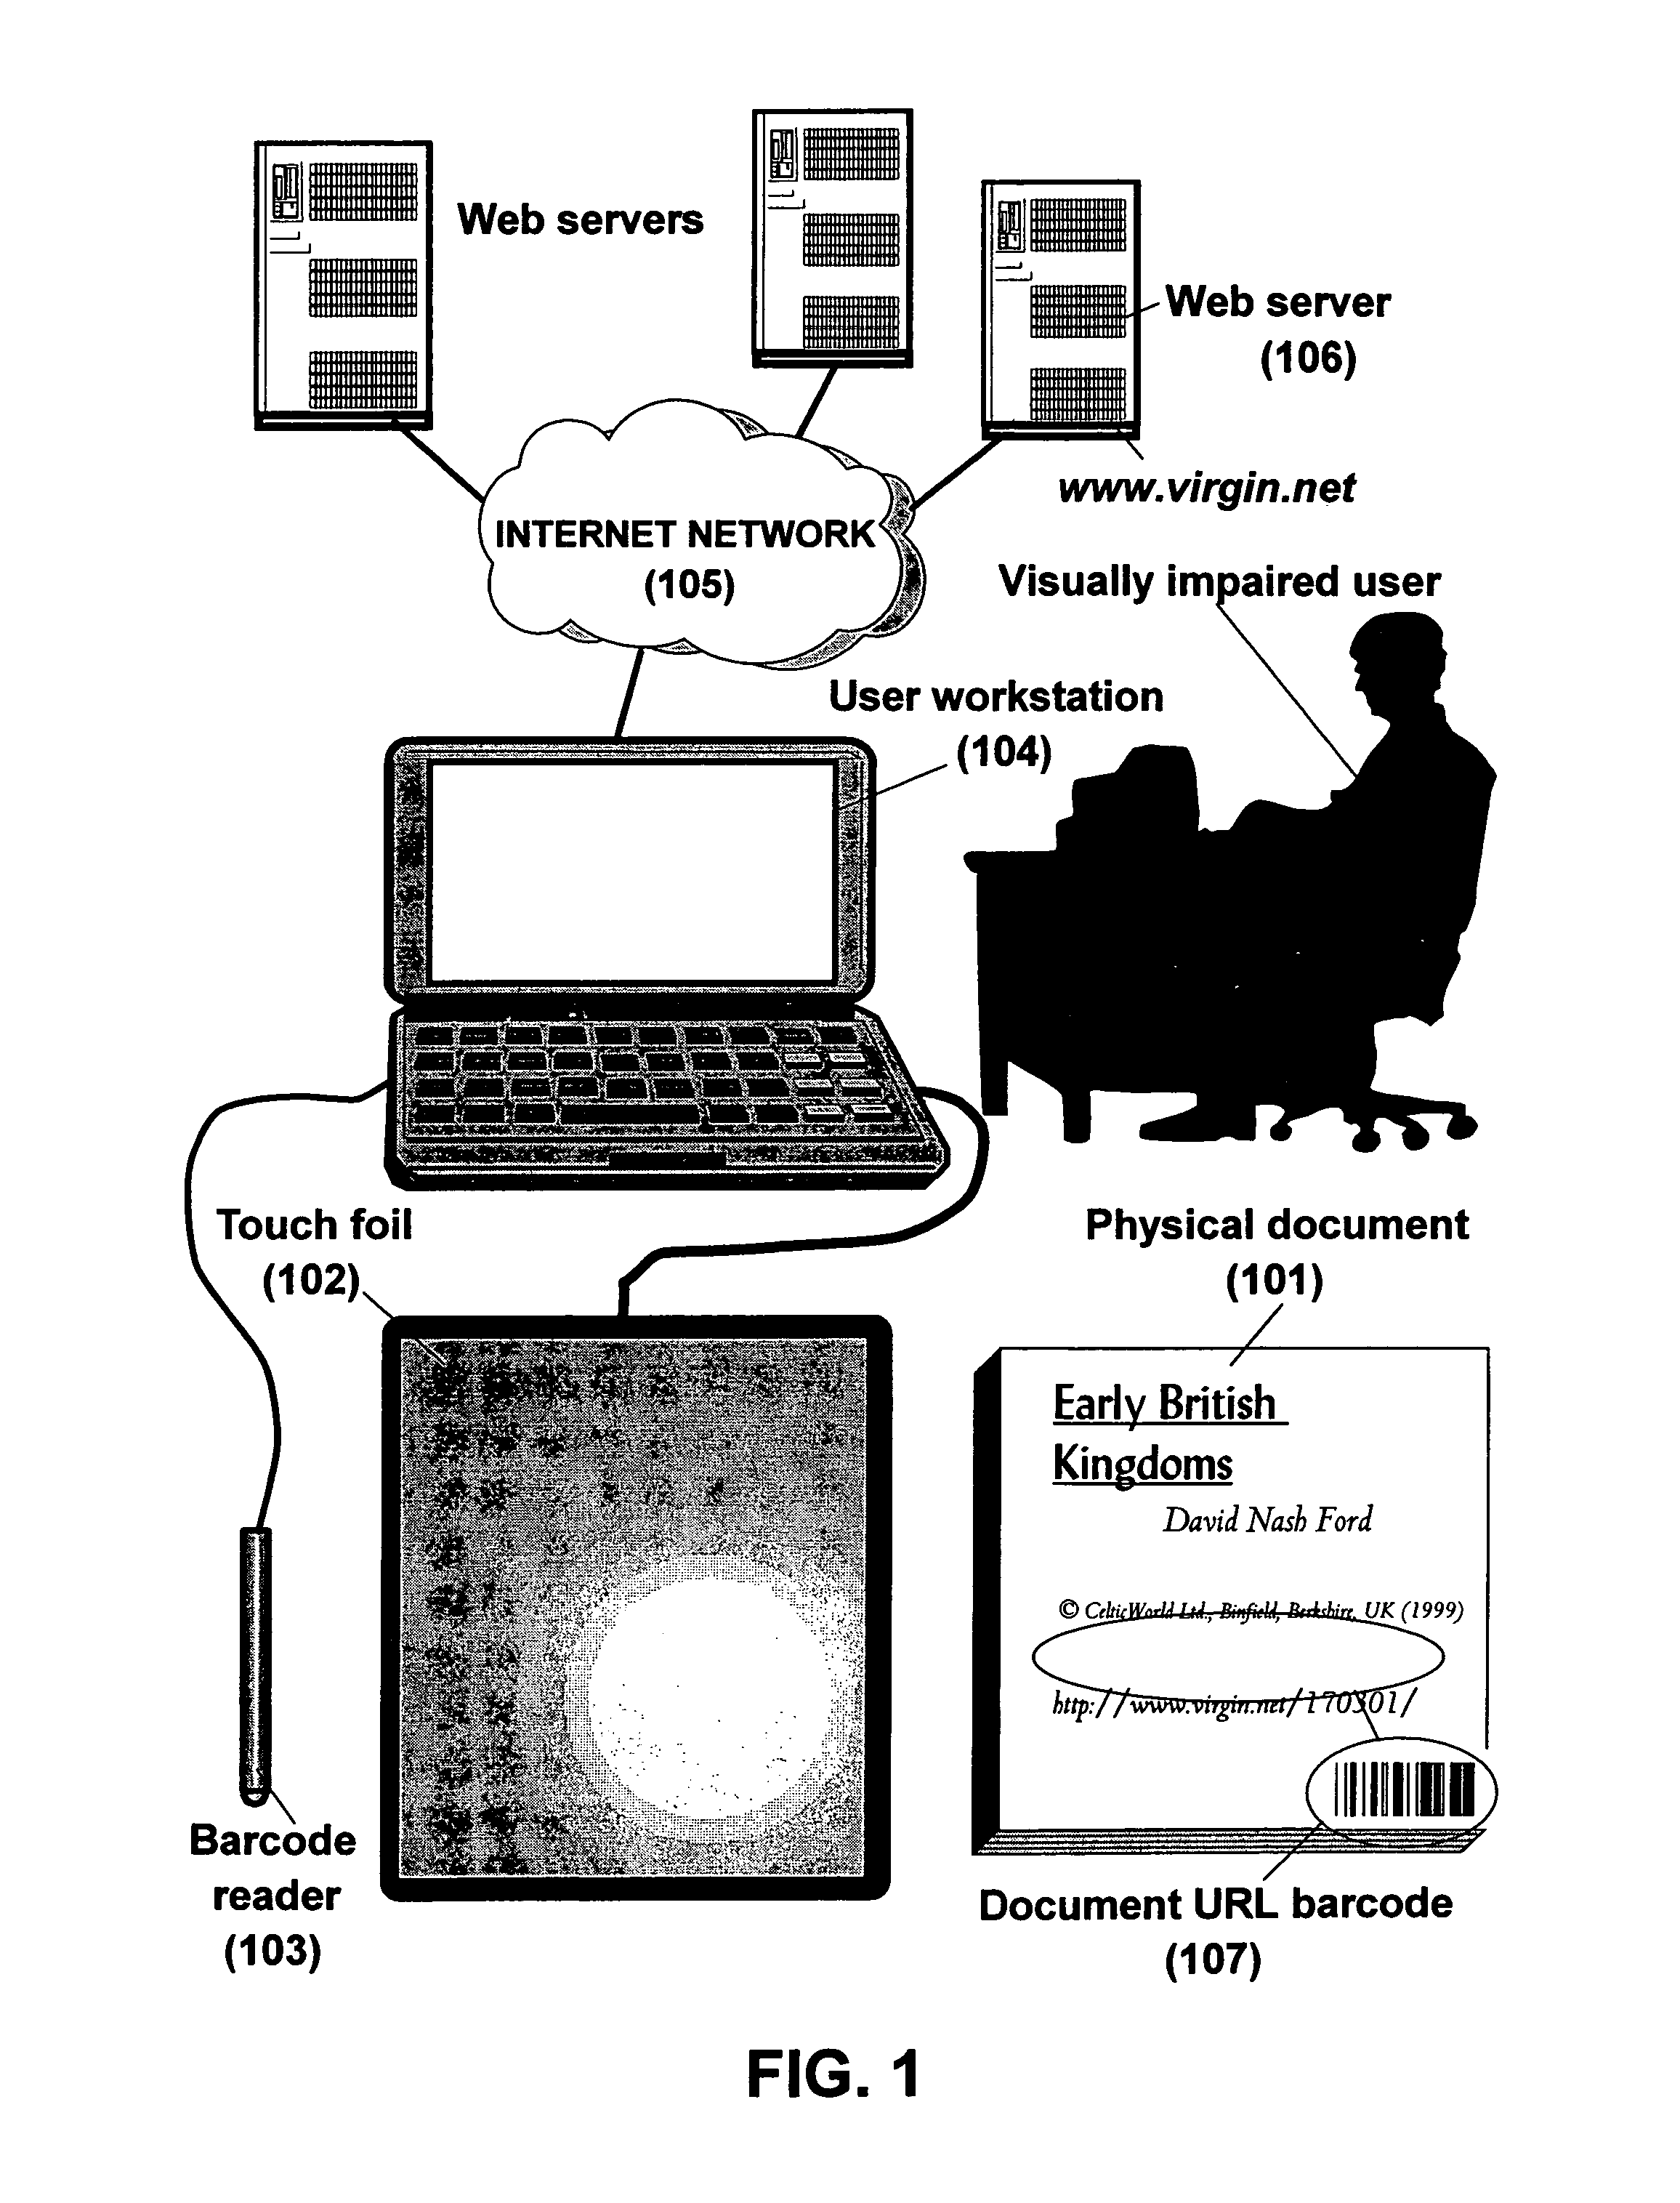 System and method to enable blind people to have access to information printed on a physical document